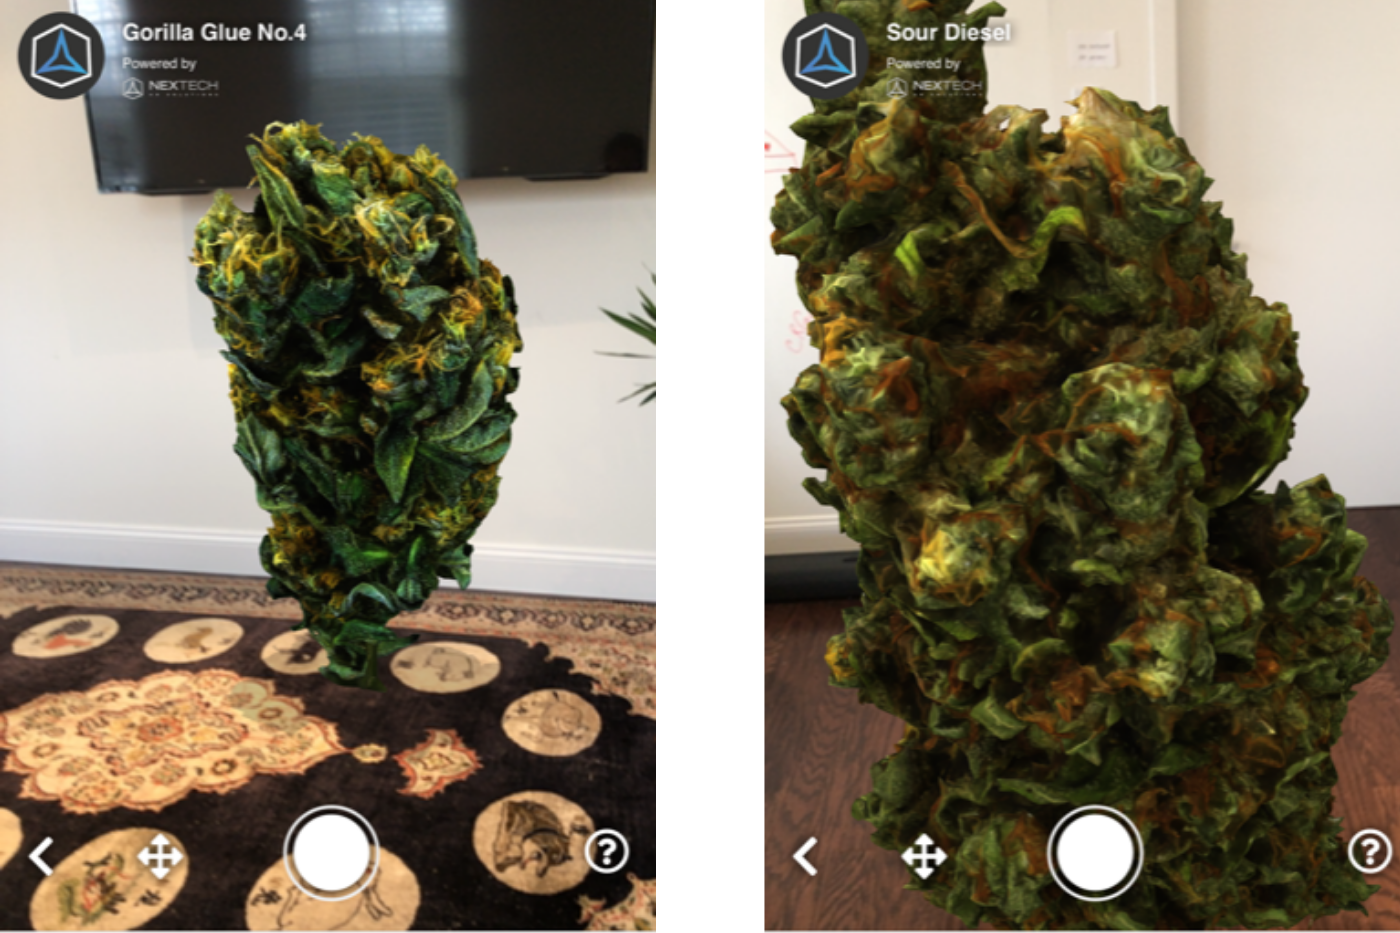 NexTech AR Solutions Introduces Augmented Reality Cannabis Dispensary Where It's Legal